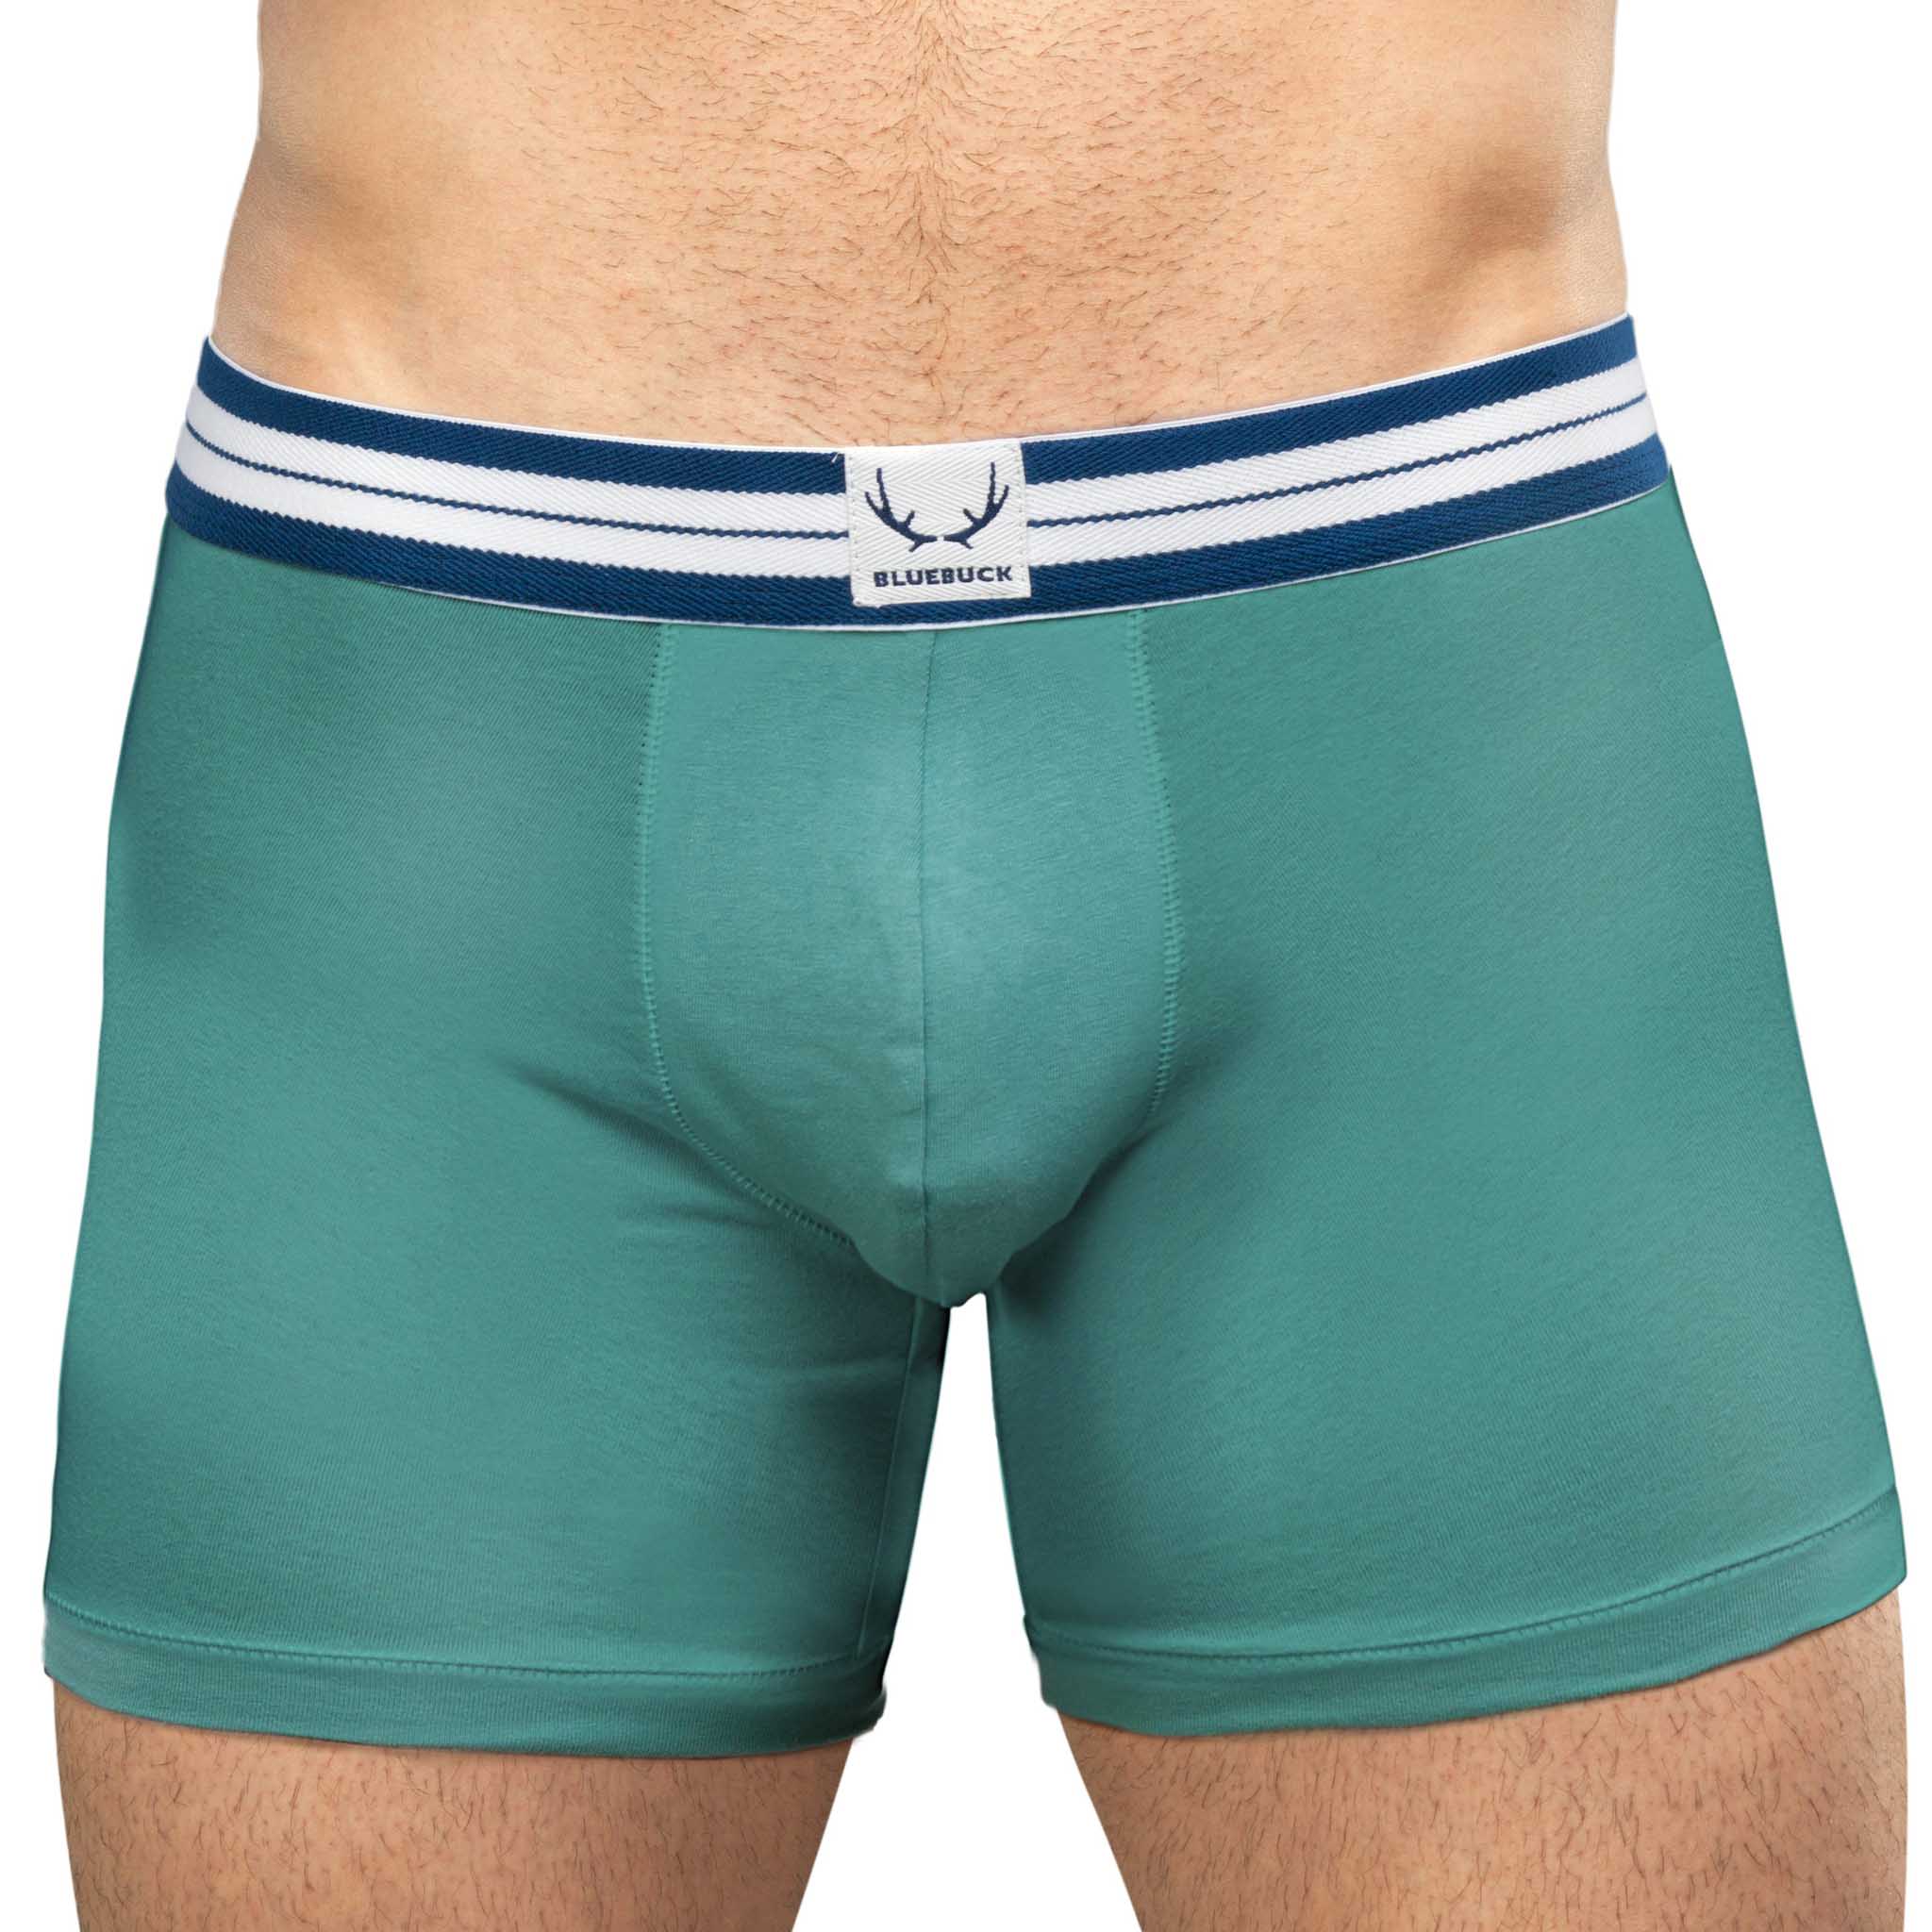 Green, long boxer shorts made of organic cotton from Bluebuck